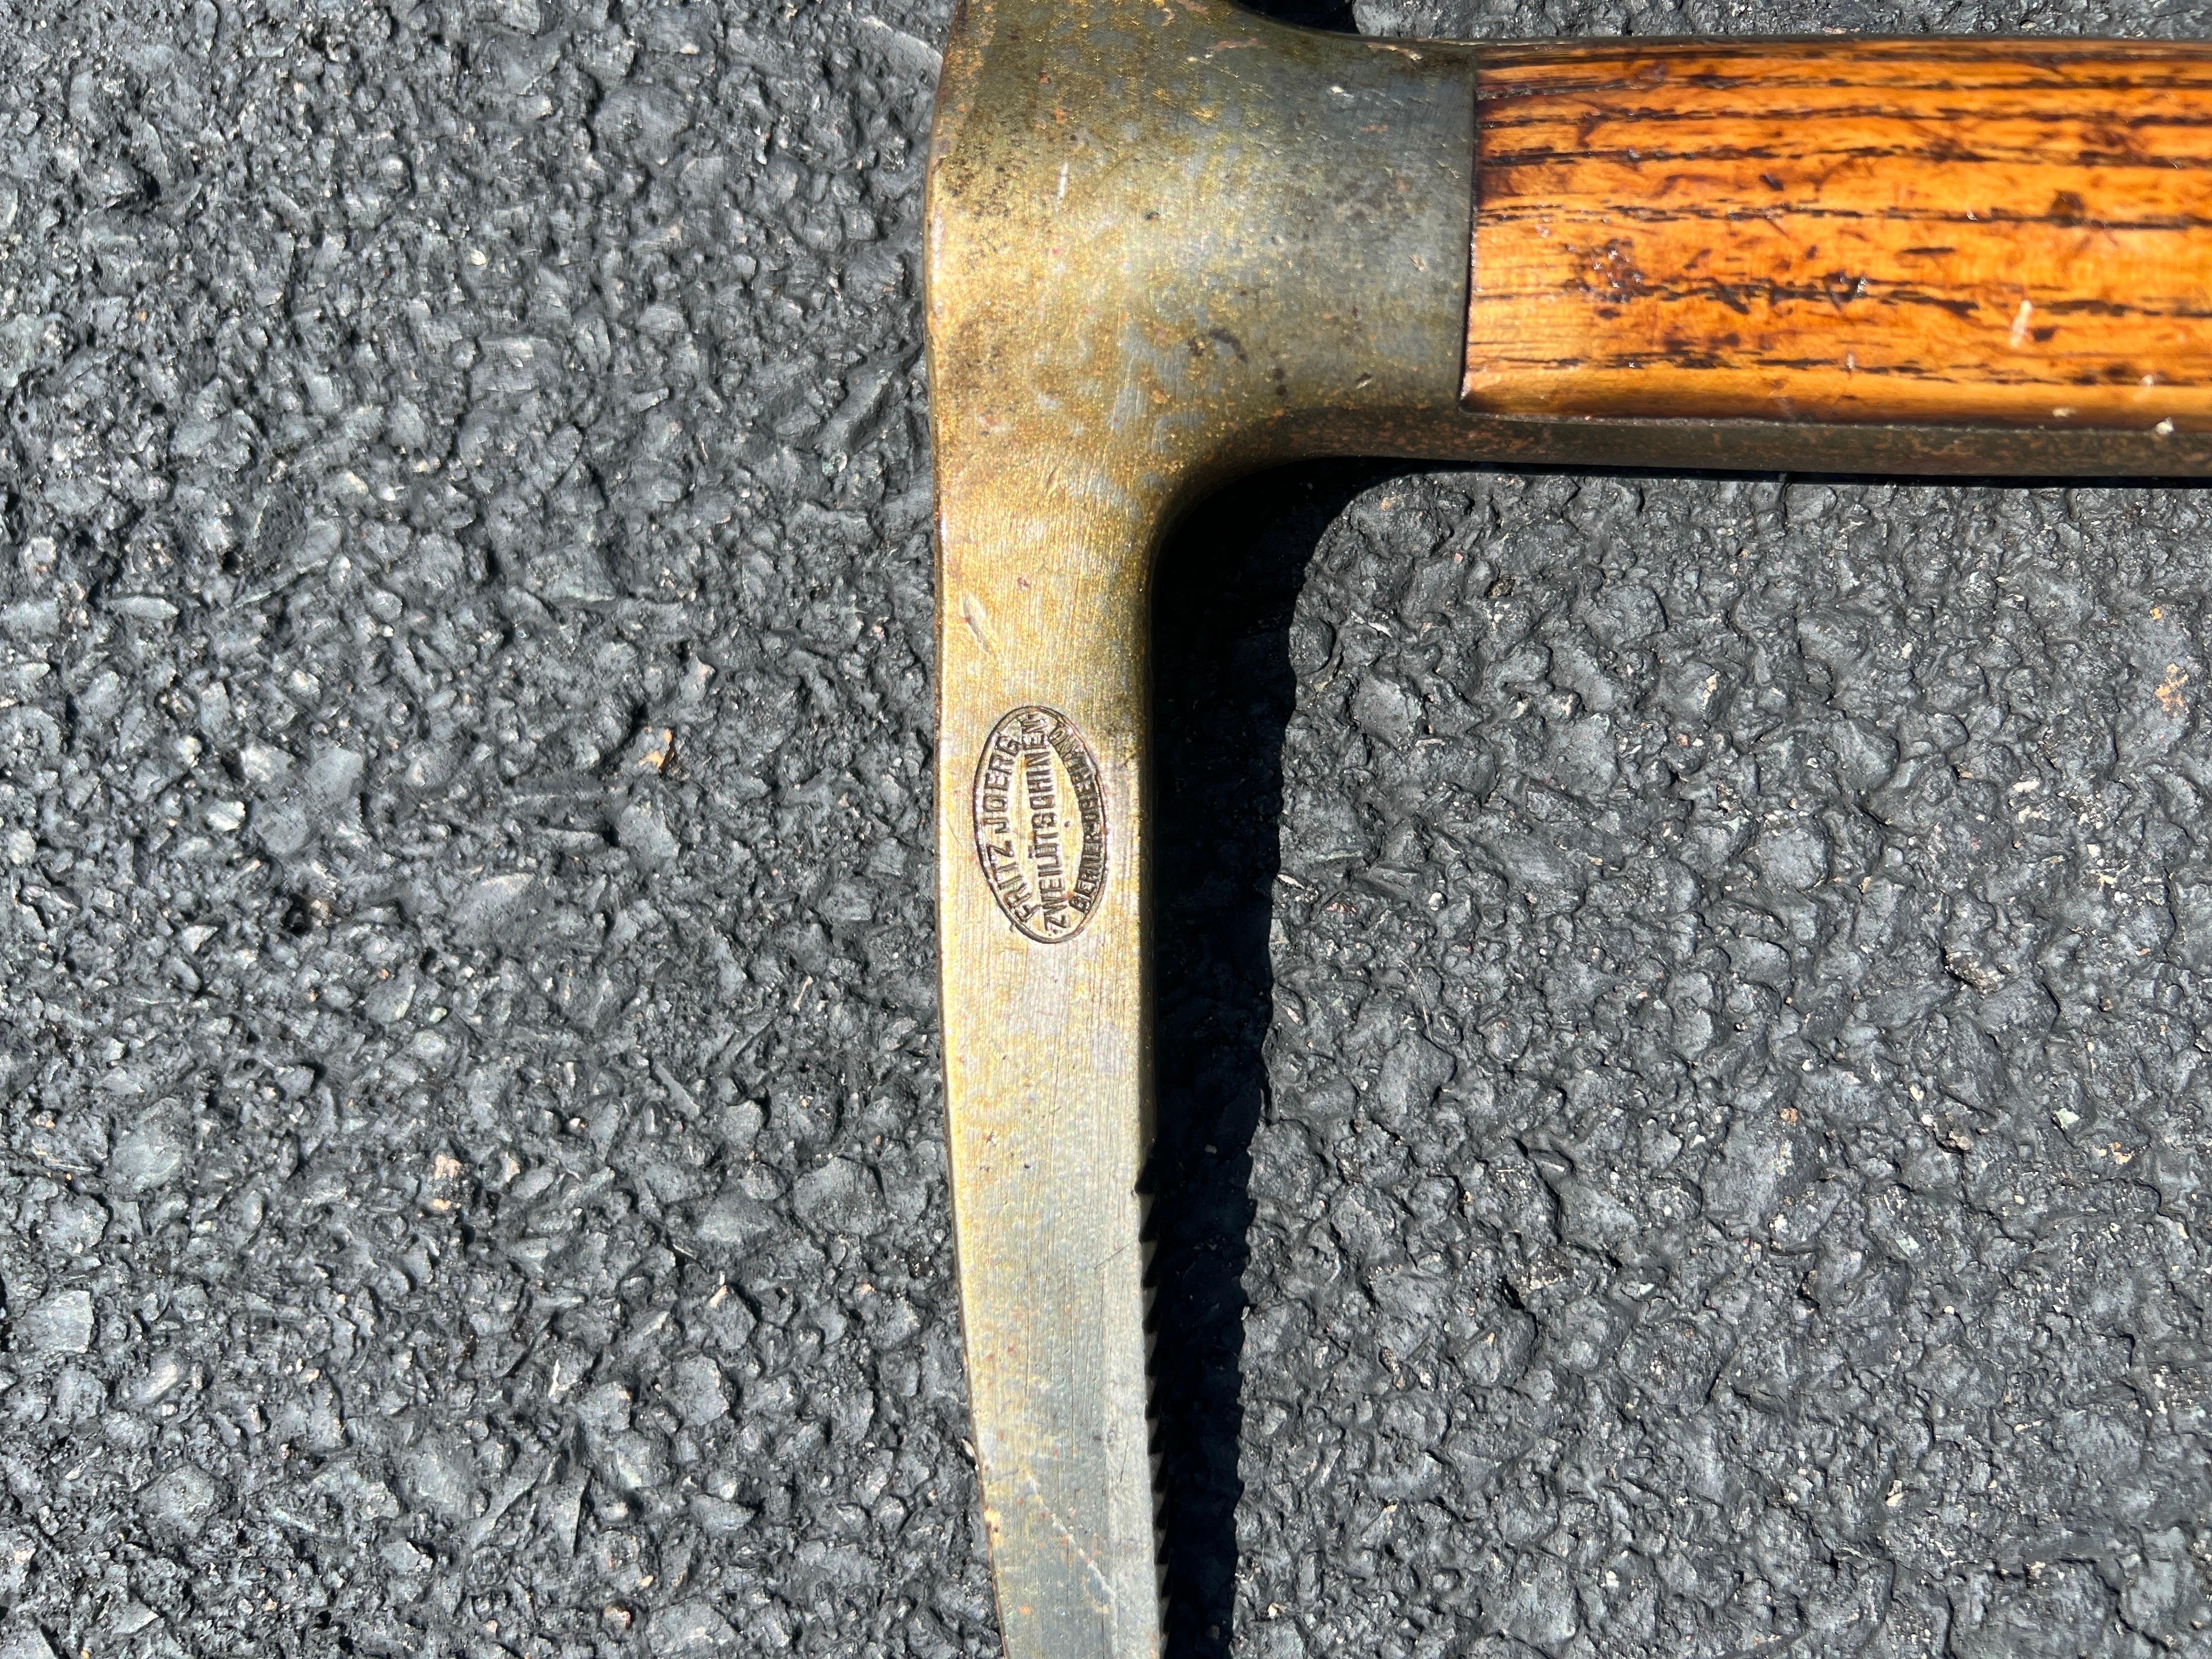 A great ice axe that was made by the renown blacksmith Fritz Jörg in the small area of Zweilütschinen in the Interlaken-Oberhasli district. 
One side of the head is inscribed with “F. JORG ZWEILUTSCHINEN BERNER OBERLAND”. 
It has a wonderful patina